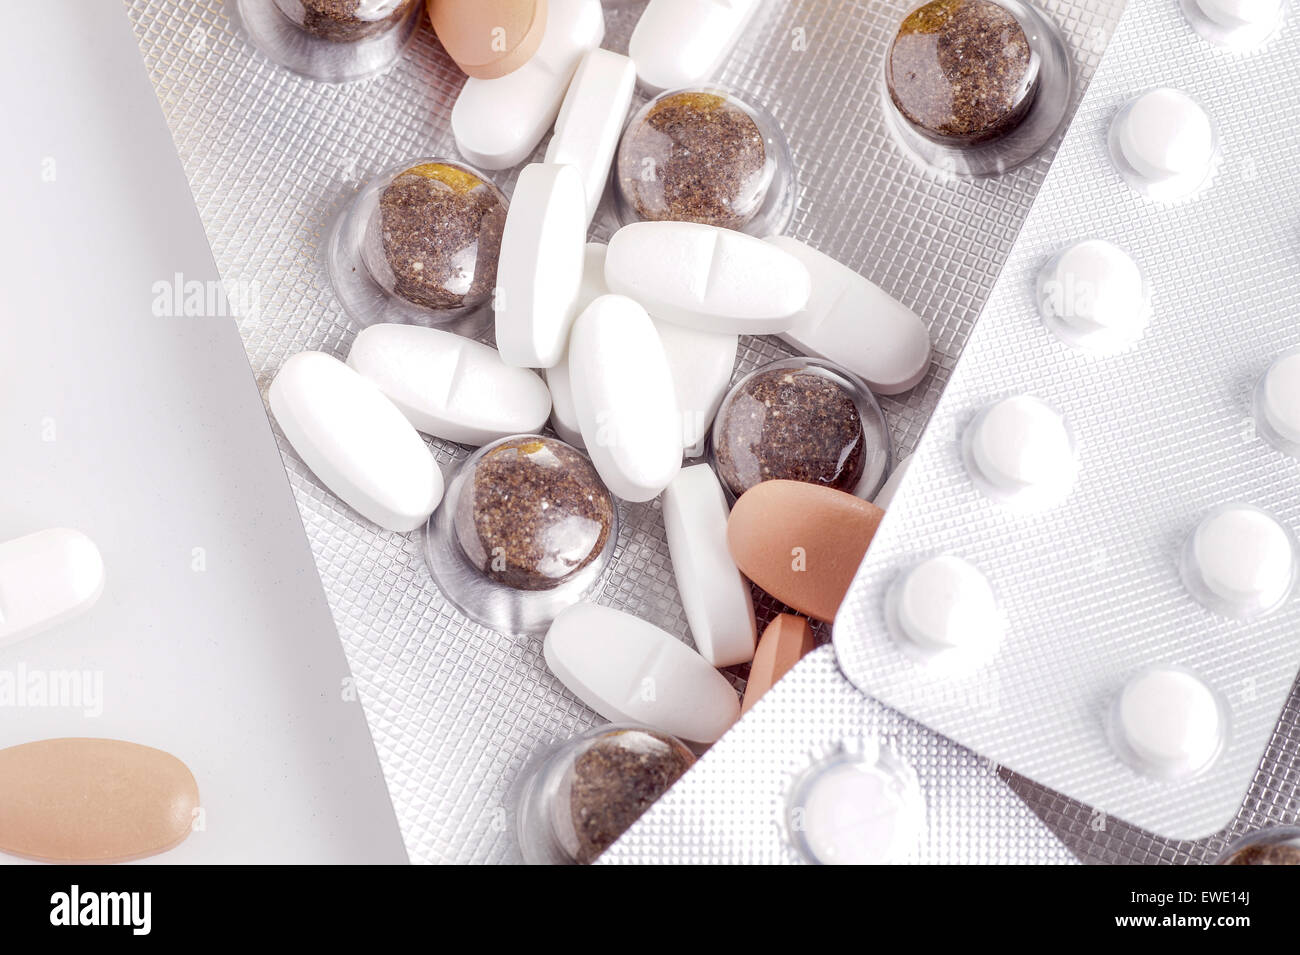 Medicine pills and tablets lying in a pile Stock Photo